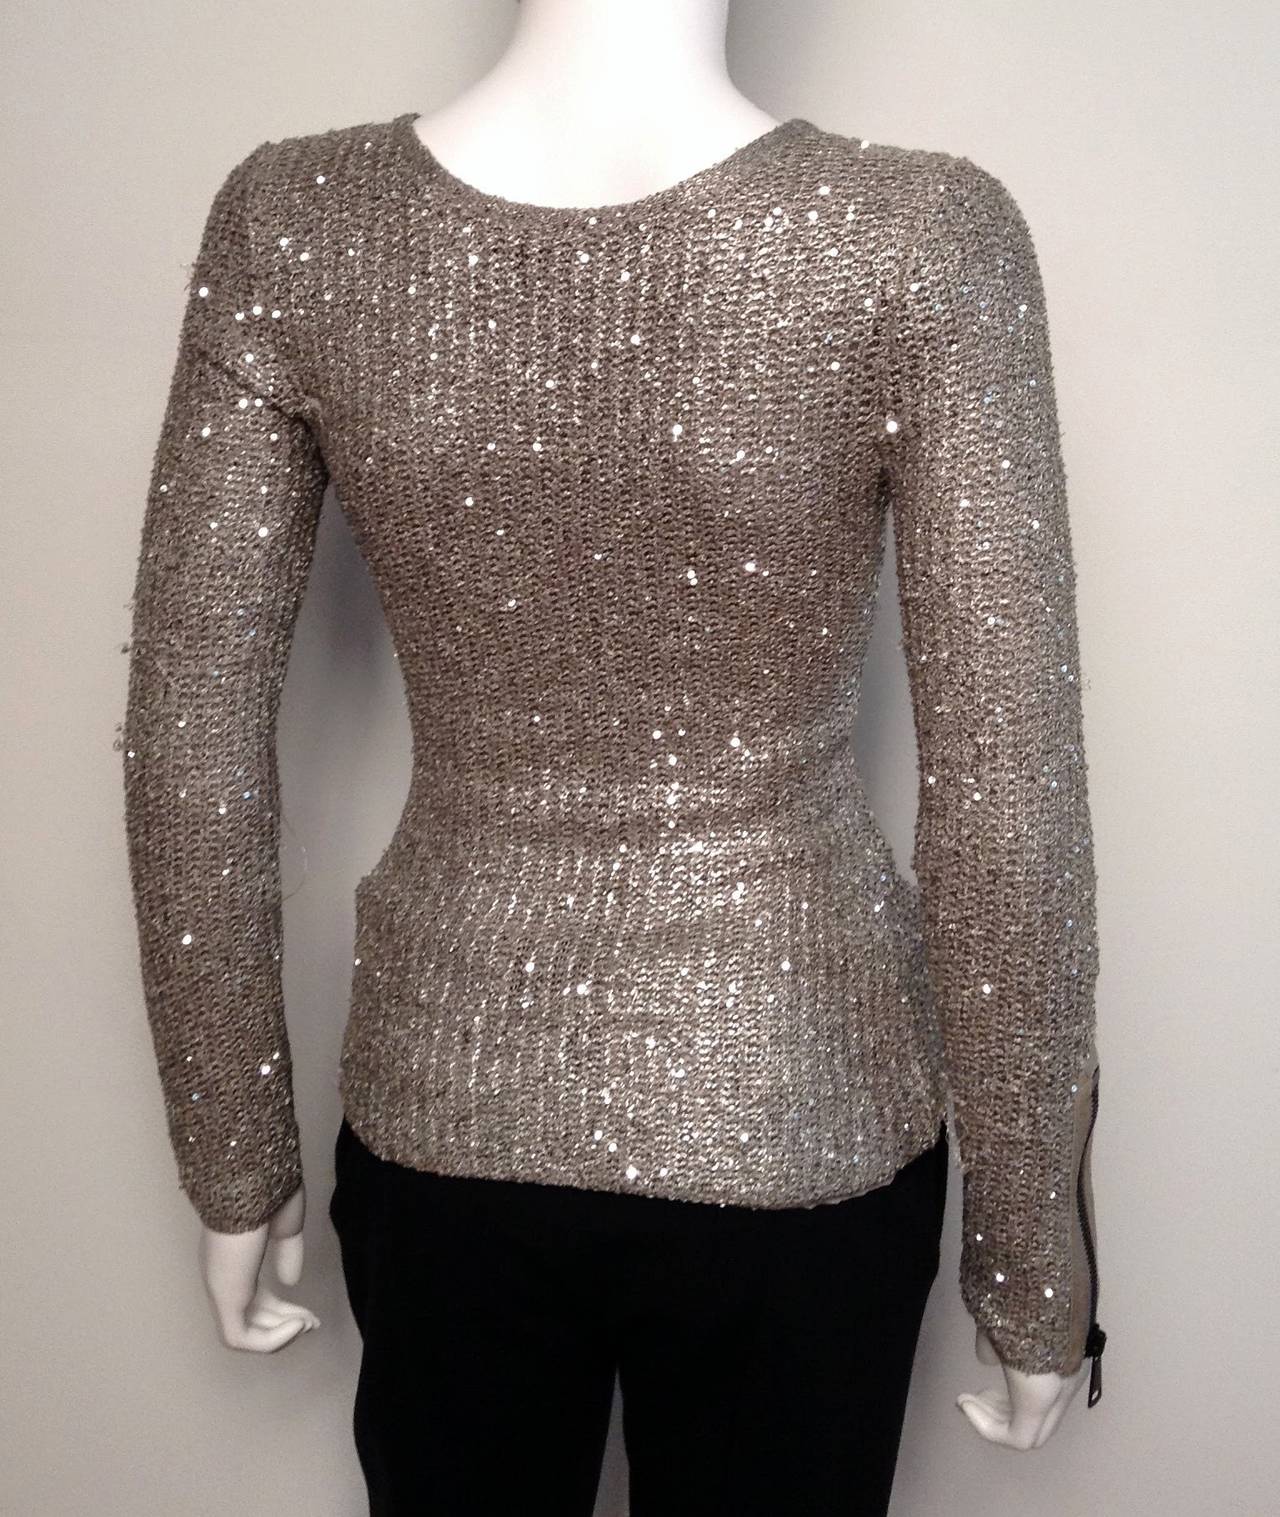 Tom Ford Grey Mesh Sequin Knit Sweater Size S Unworn 3